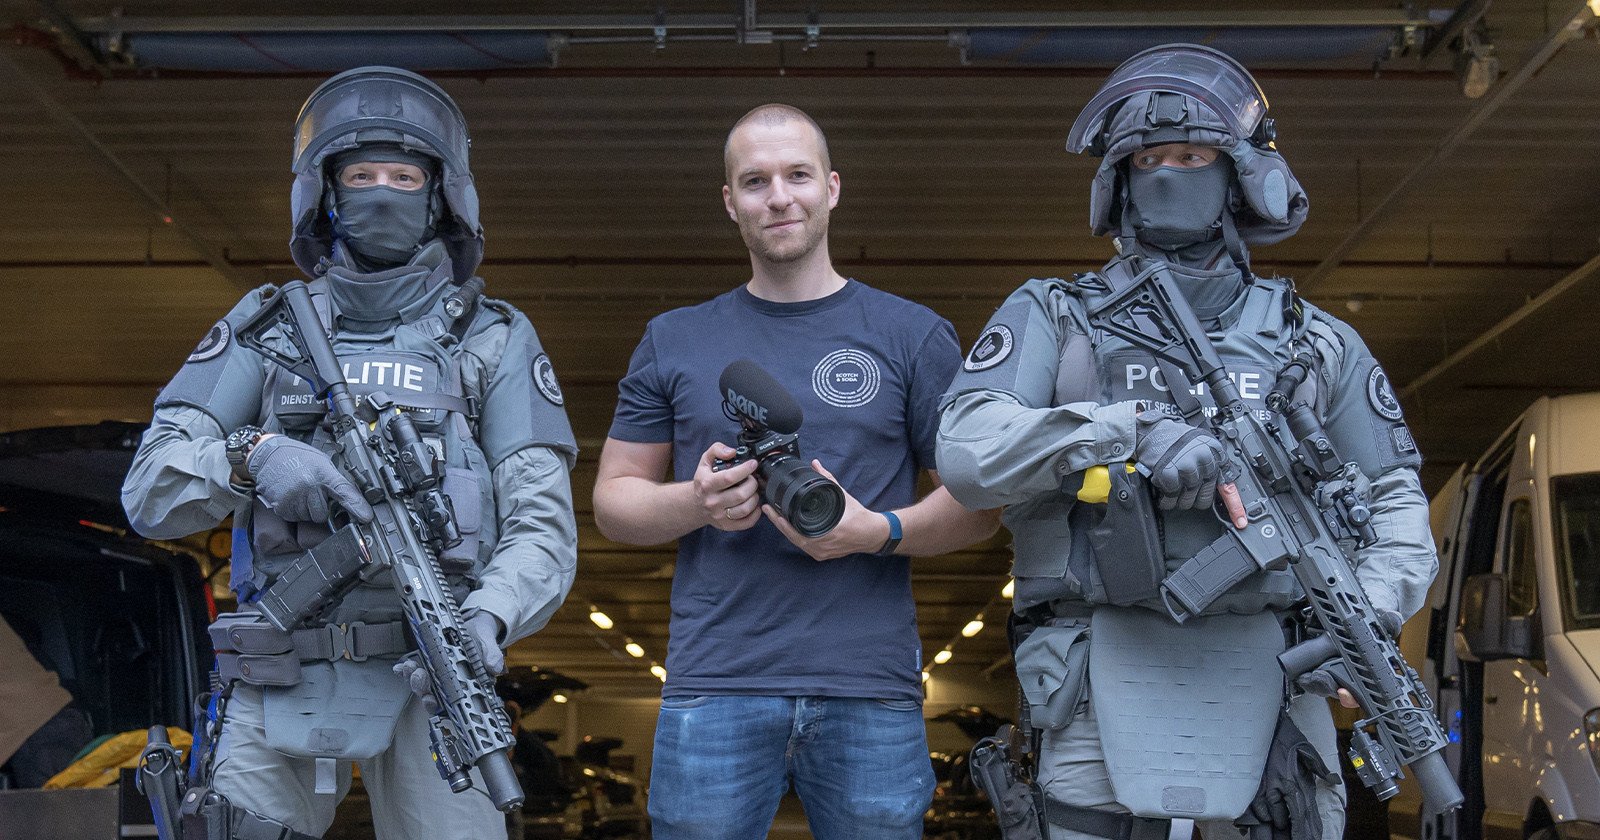 Dutch Police Officer Combines Law Enforcement and Photography